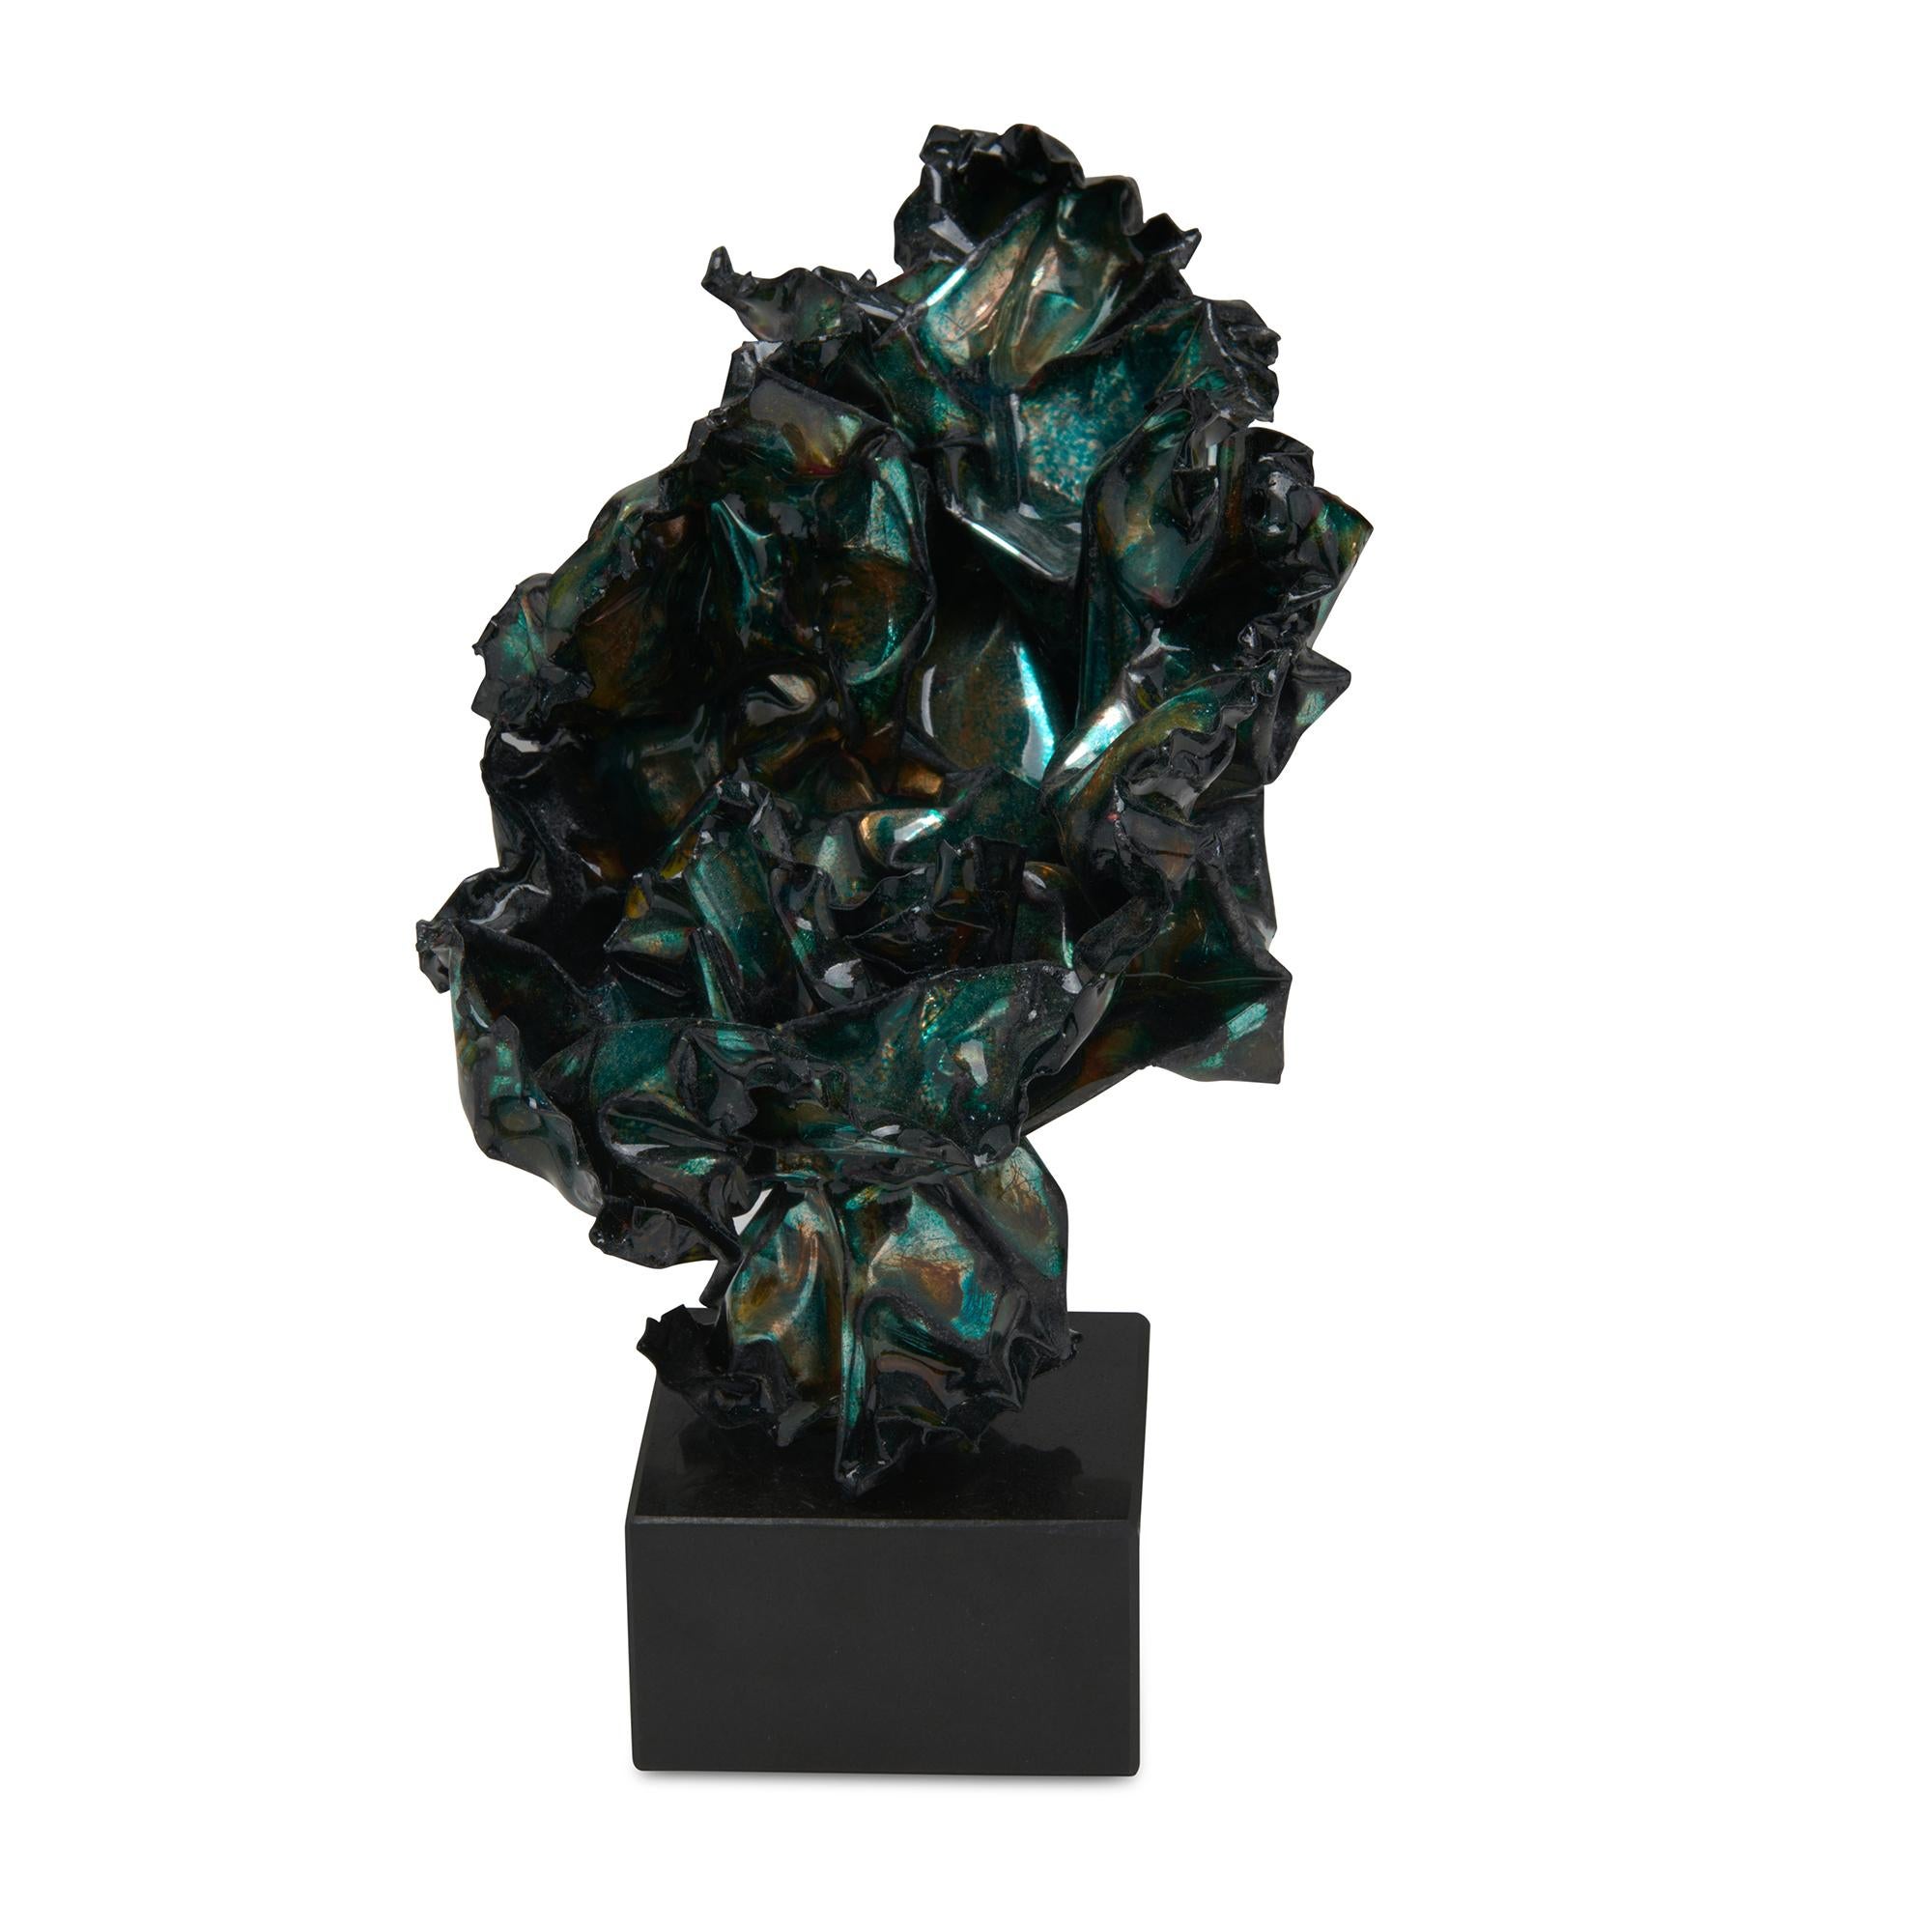 Shaped like an ancient bonsai, the sweeping nature of this sculpture is reminiscent of the care and love bestowed upon bonsai trees  throughout time.  Hues of rich greens, soft coppers, and gentle rose are instilled in every crevasse and fold.  